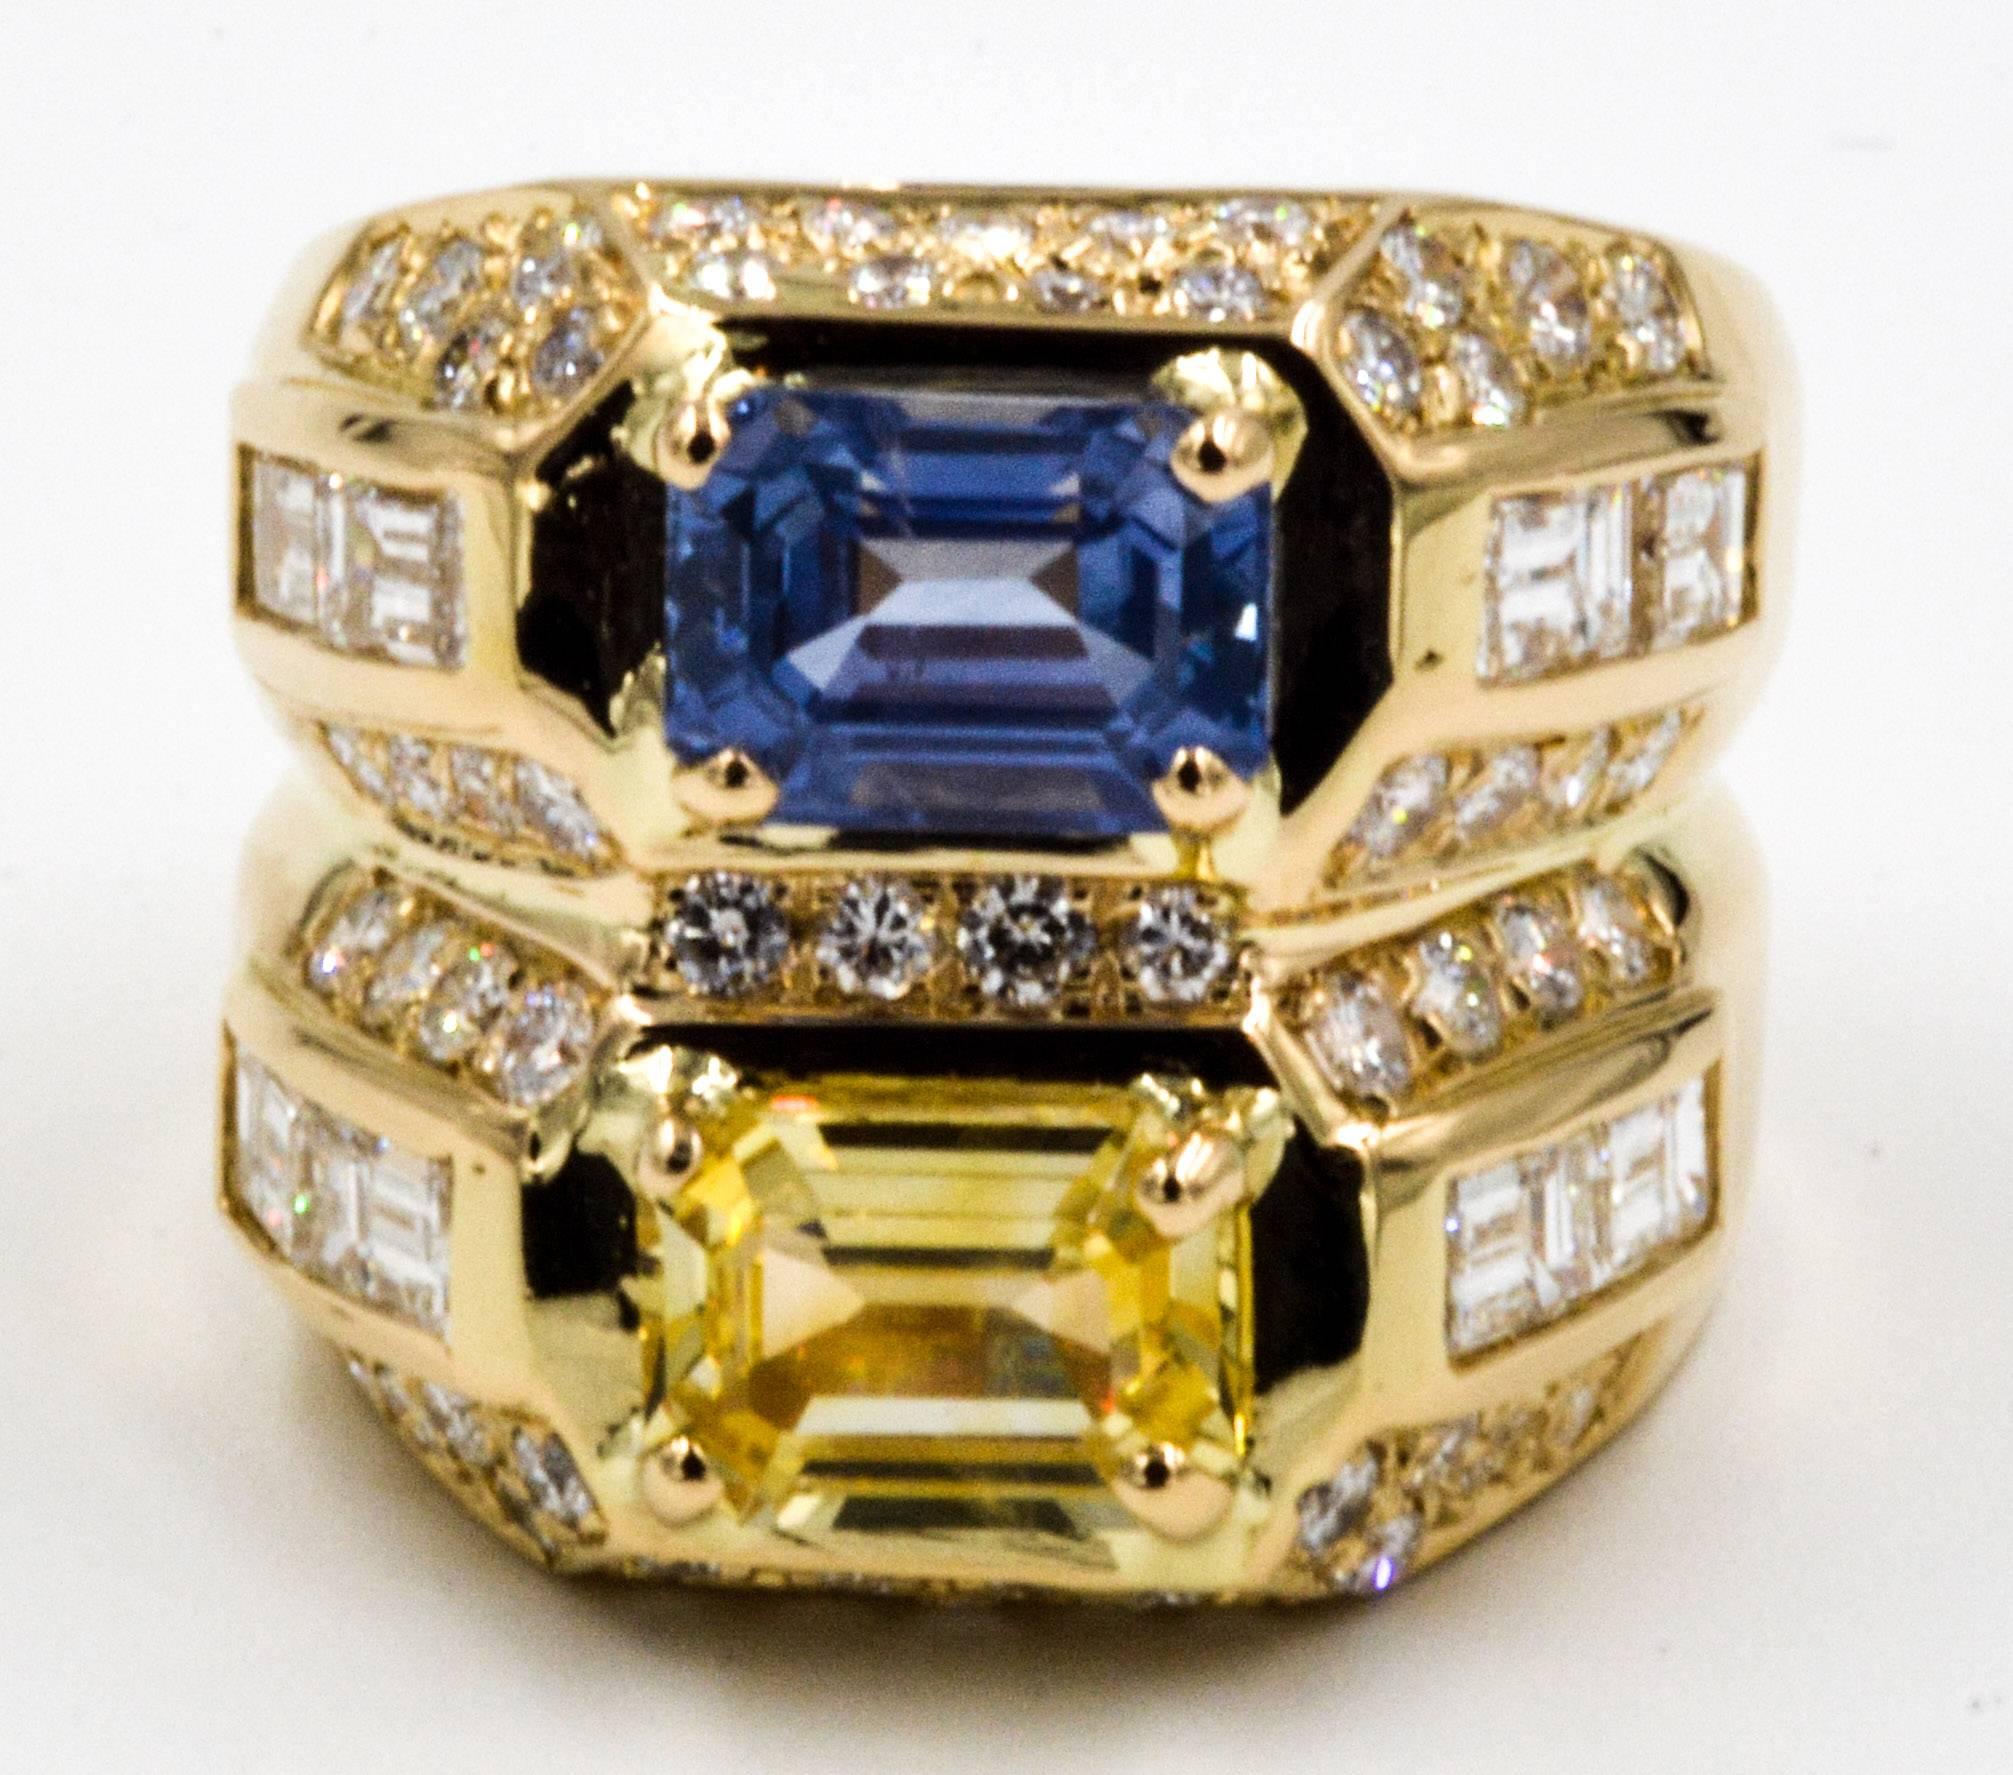 Twin Contrasting Yellow and Blue Sapphire 18 Karat Yellow Gold and Diamond Ring 2